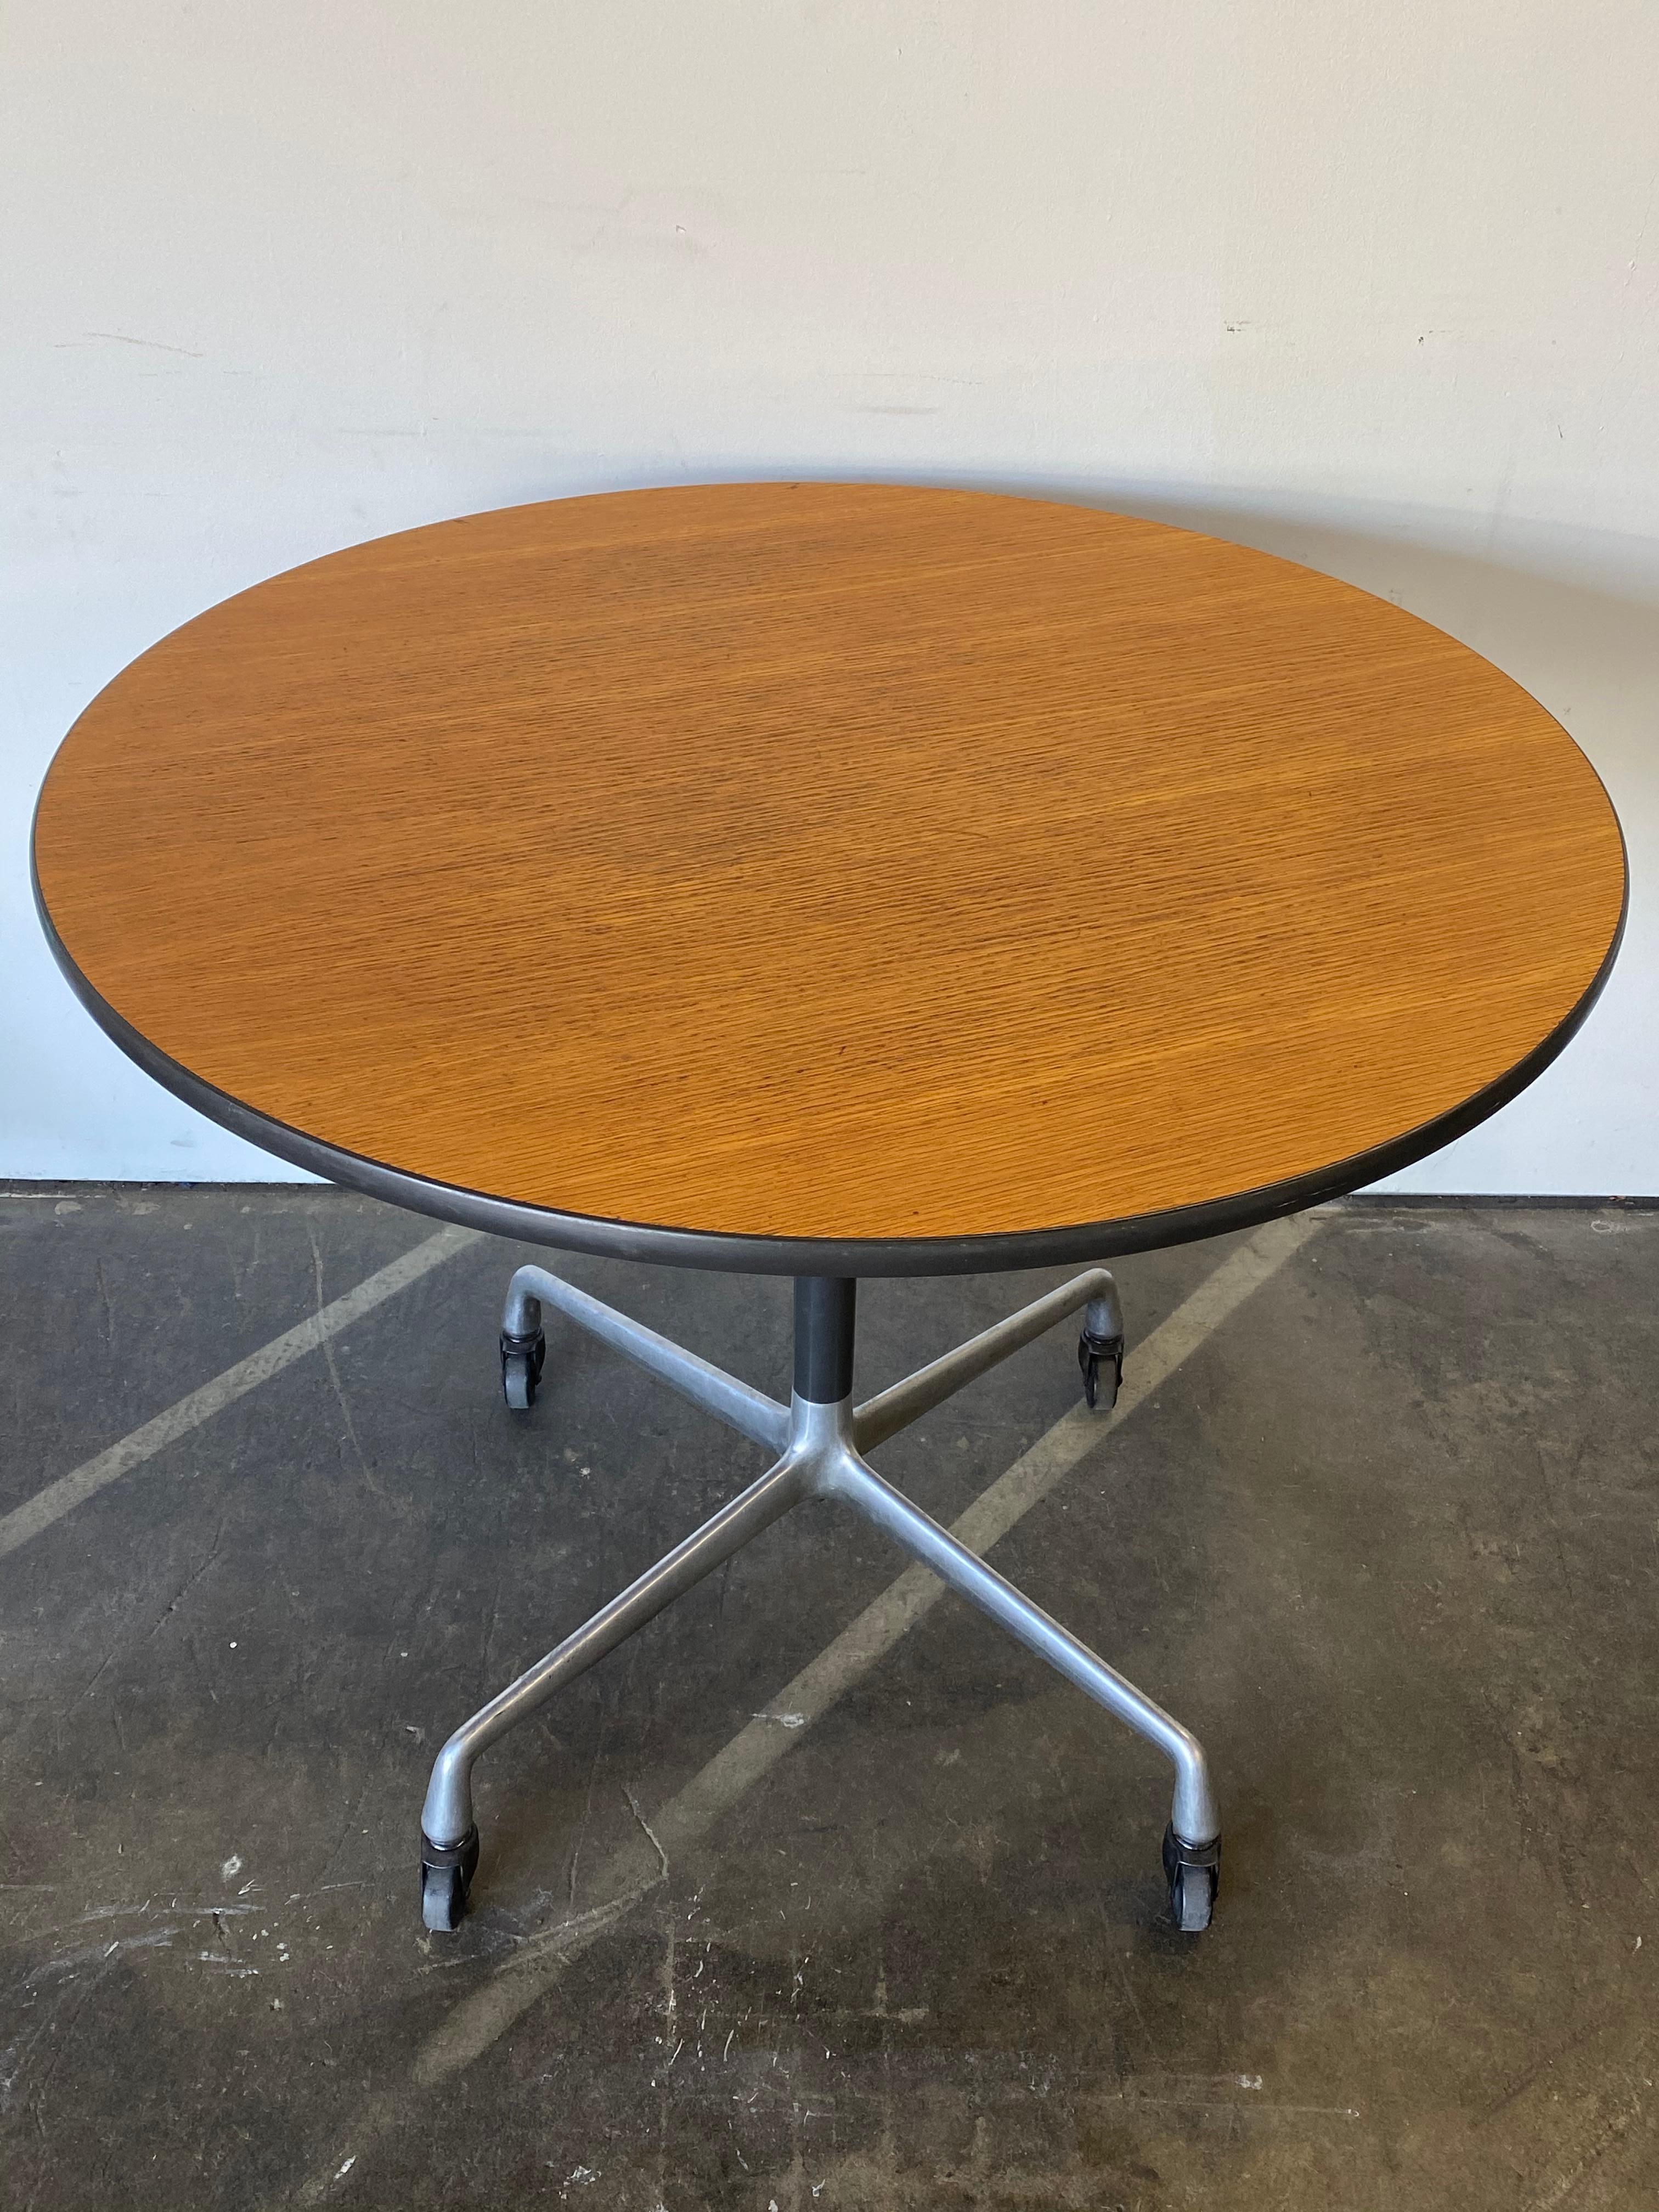 American Herman Miller Eames Wood Top Dining Table on Aluminum Base with Casters